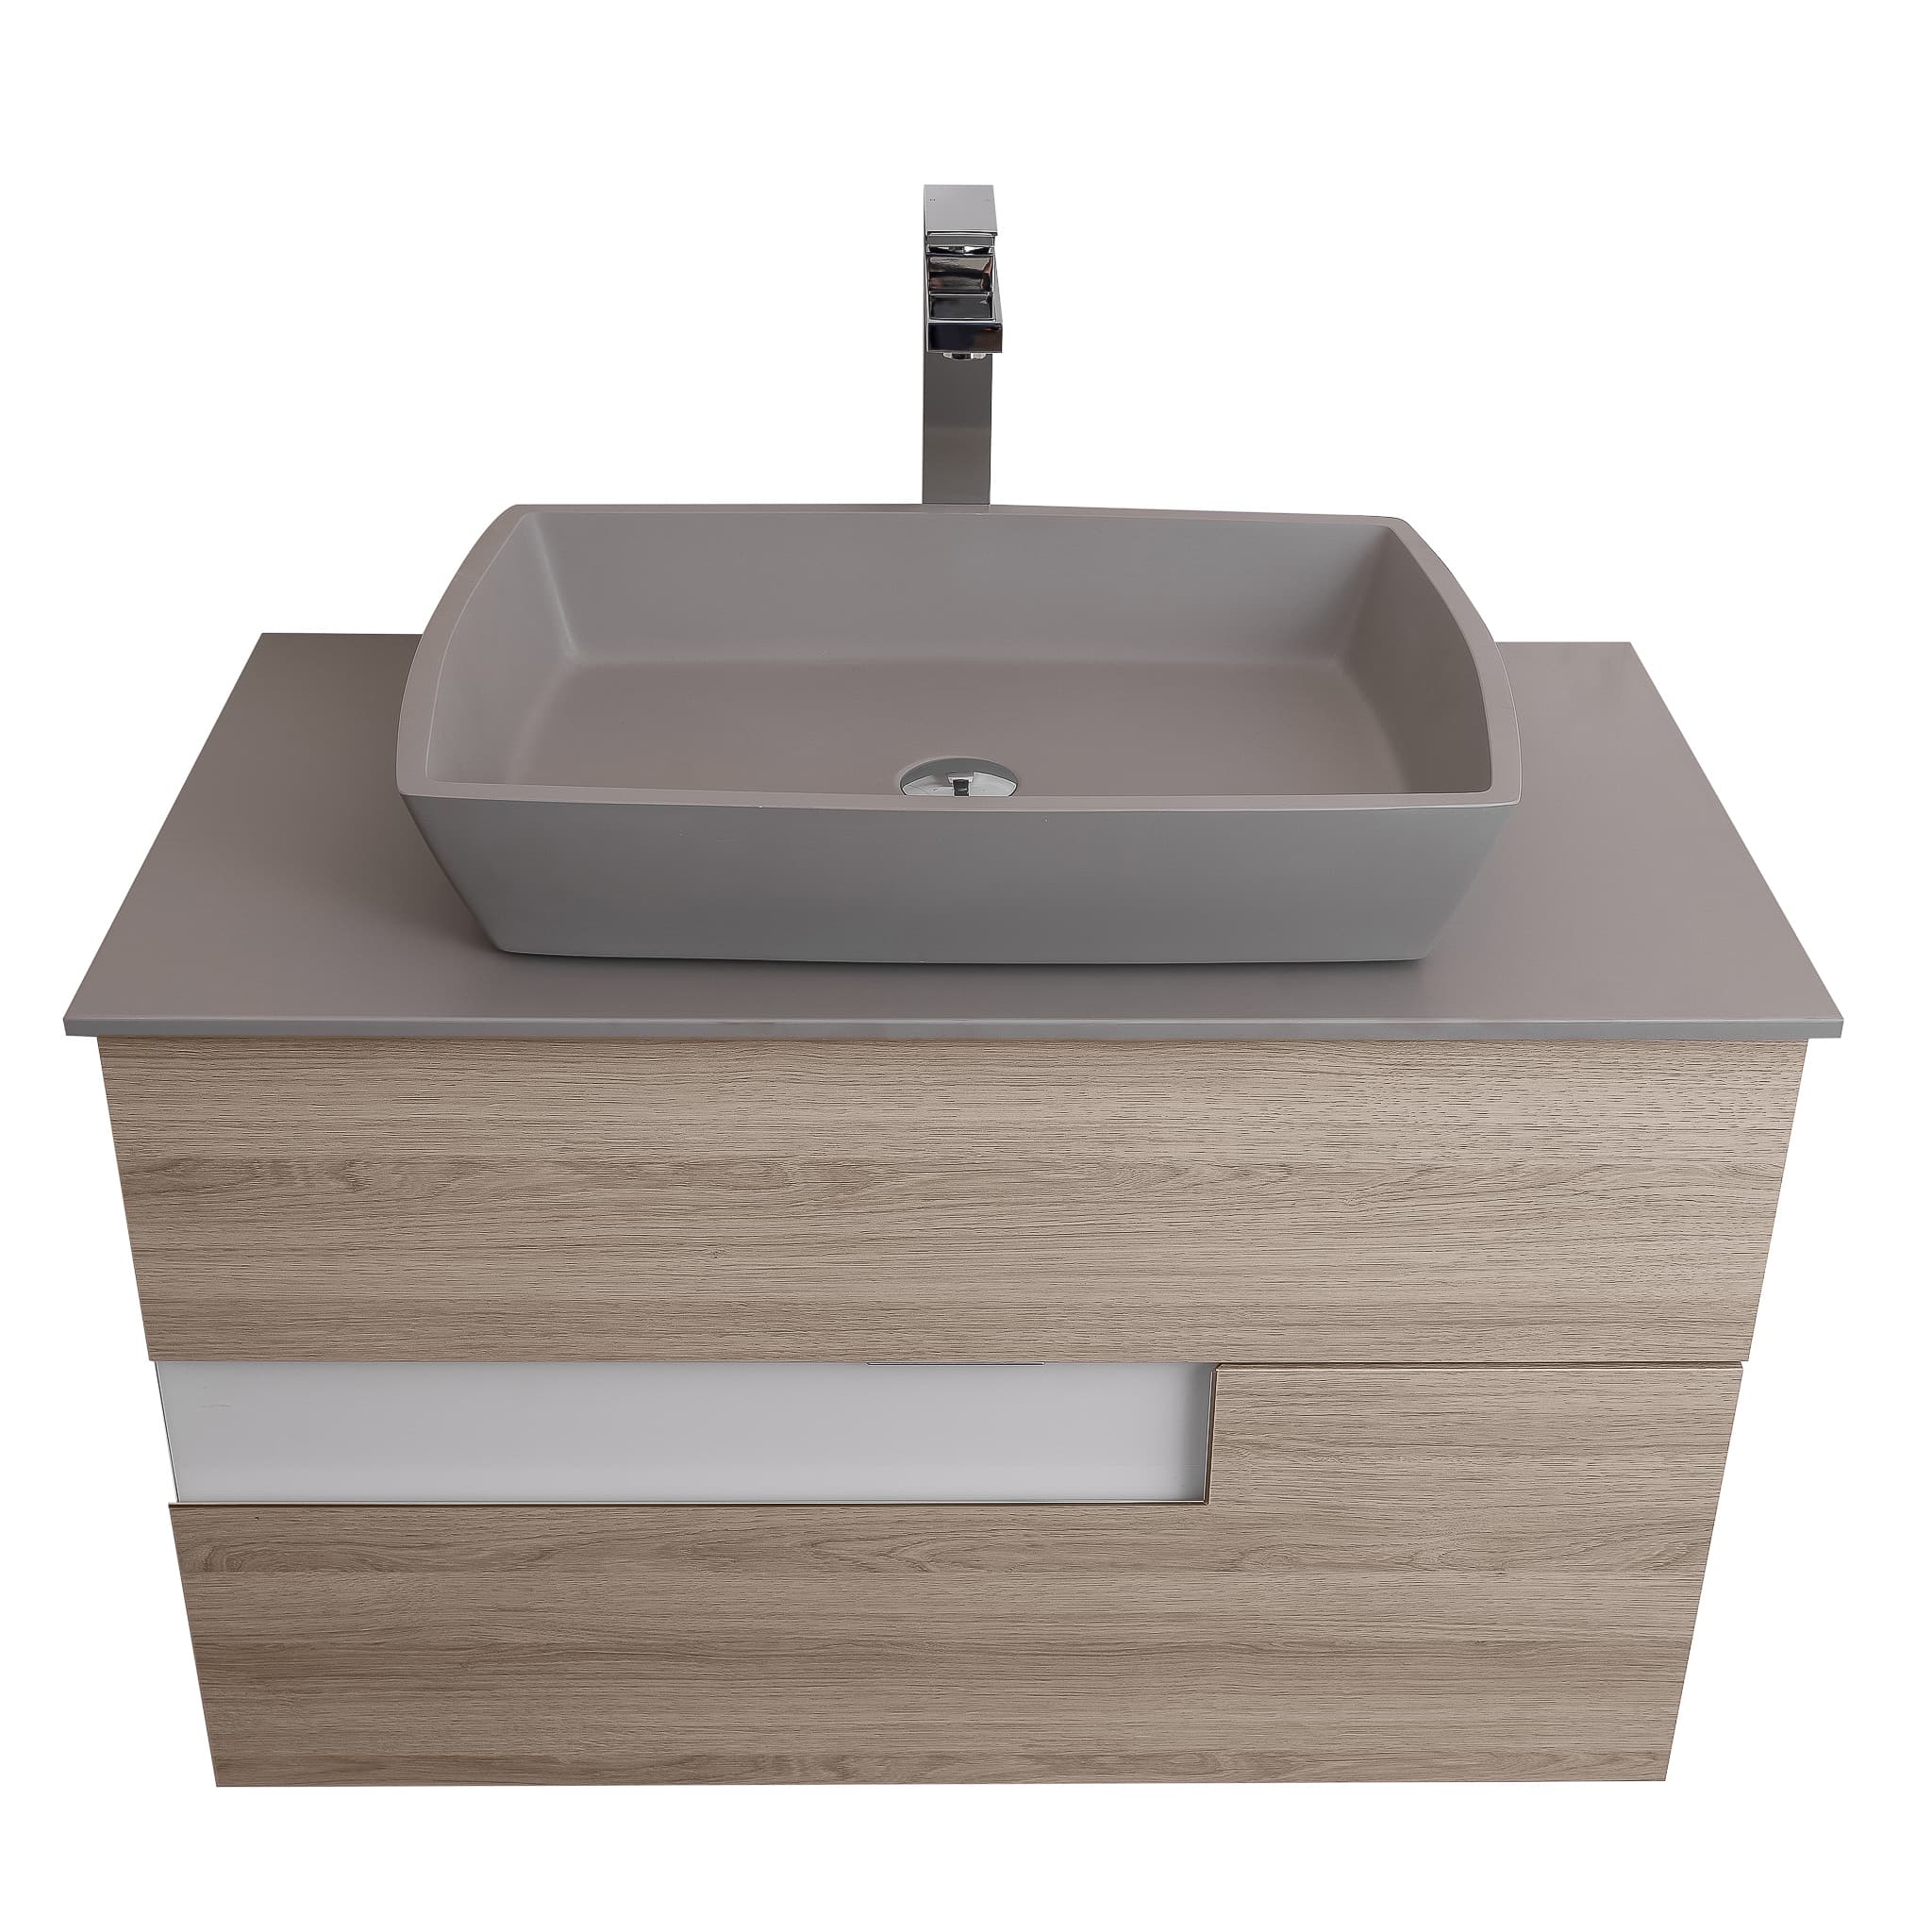 Vision 31.5 Natural Light Wood Cabinet, Solid Surface Flat Grey Counter And Square Solid Surface Grey Basin 1316, Wall Mounted Modern Vanity Set